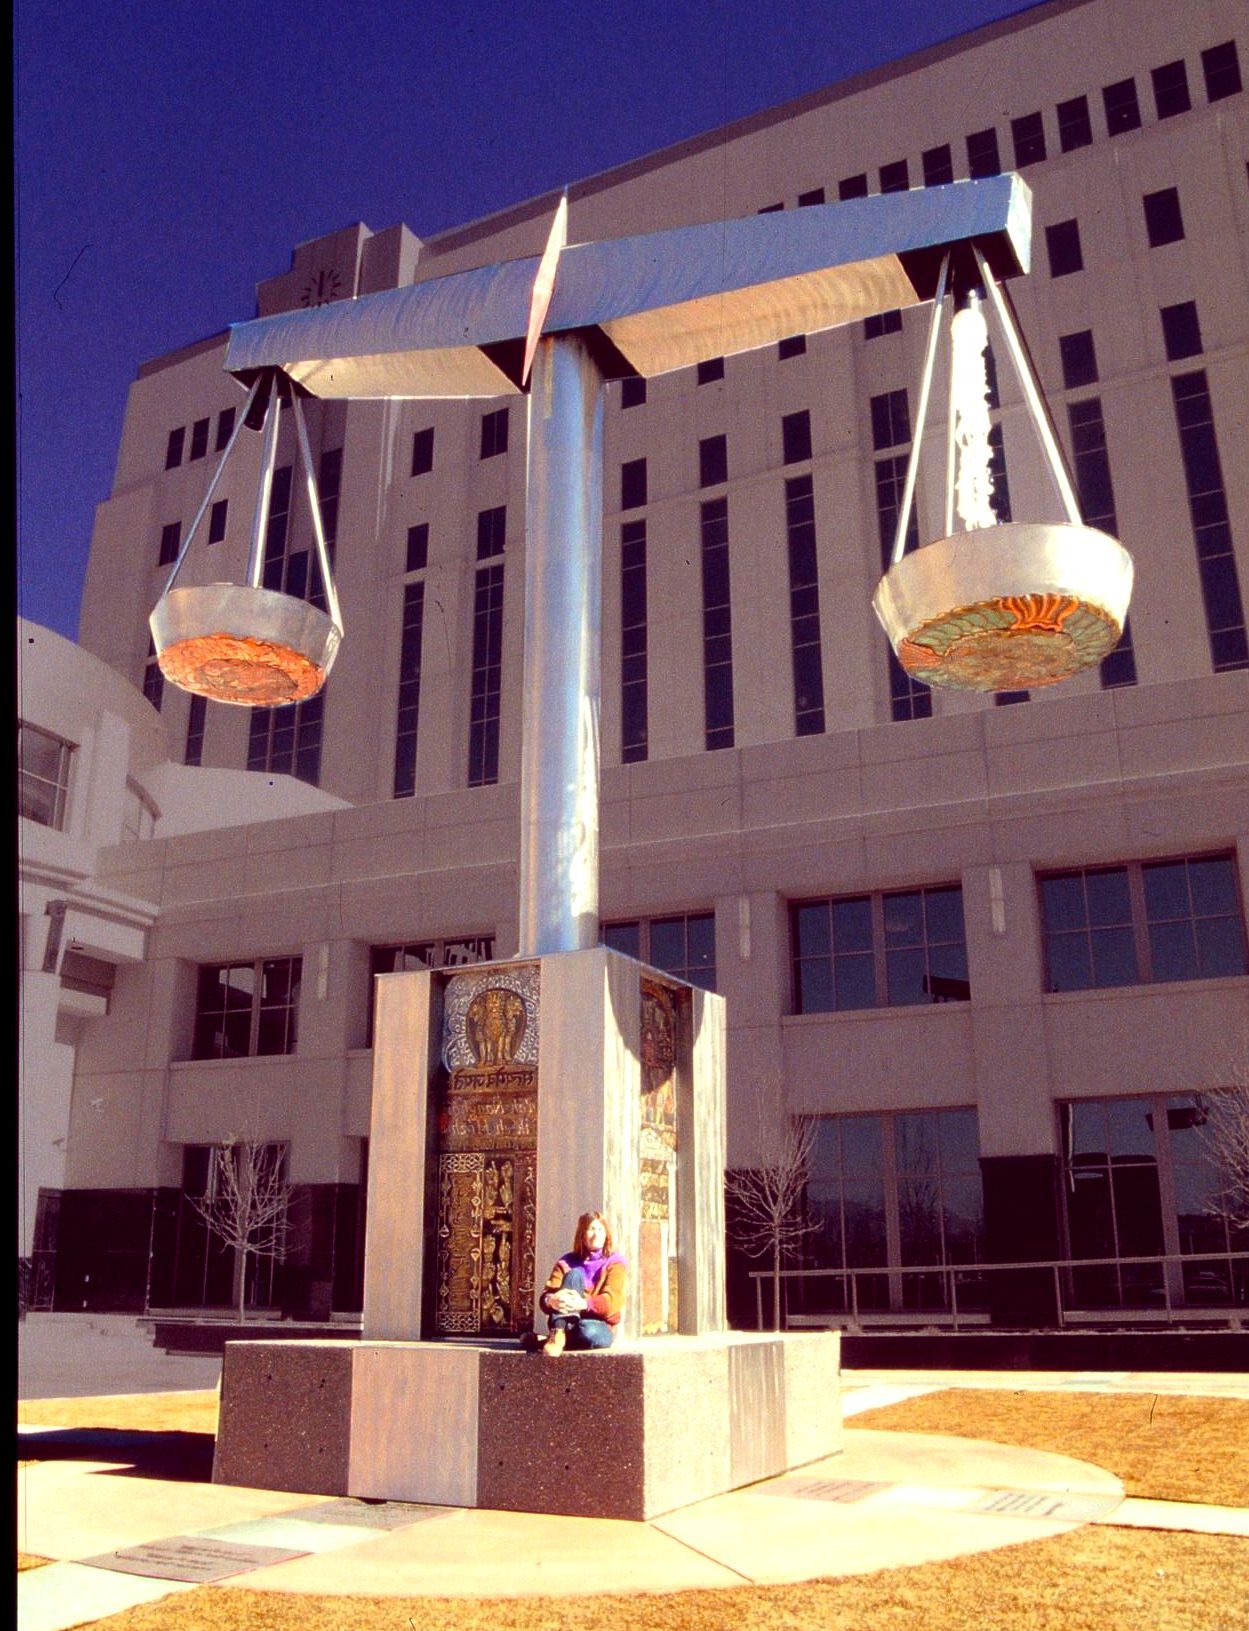 World's Largest Scales of Justice Sculpture, world record in Albuquerque, New Mexico